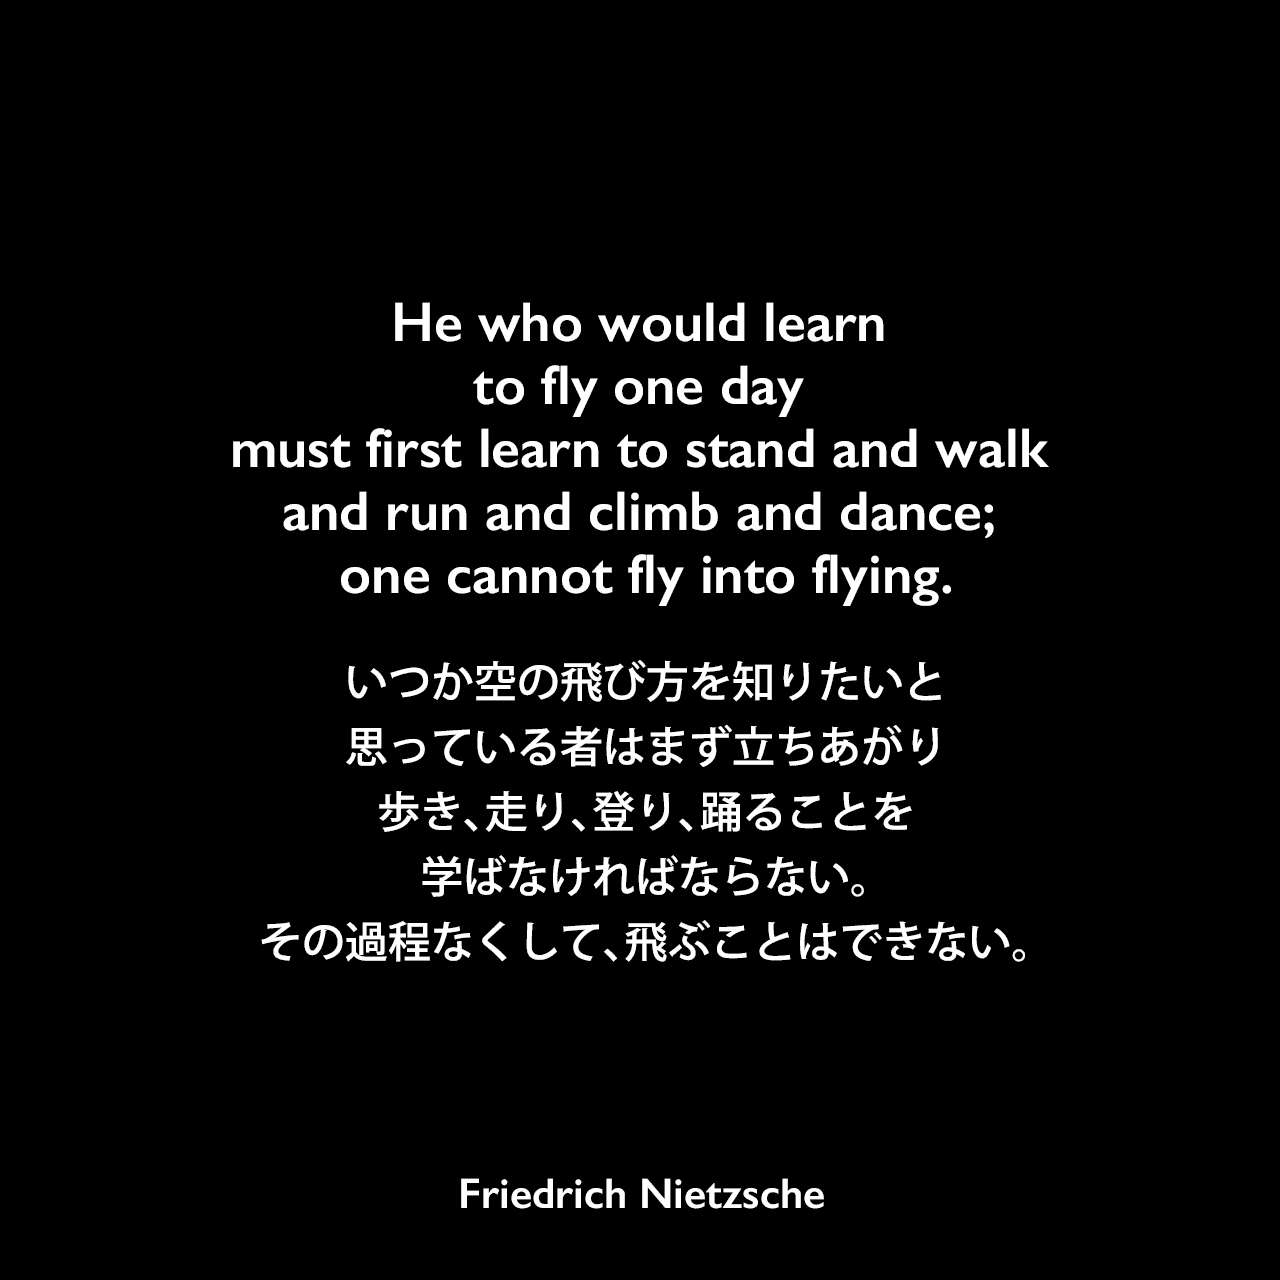 He who would learn to fly one day must first learn to stand and walk and run and climb and dance; one cannot fly into flying.いつか空の飛び方を知りたいと思っている者は、まず立ちあがり、歩き、走り、登り、踊ることを学ばなければならない。その過程なくして、飛ぶことはできない。Friedrich Nietzsche